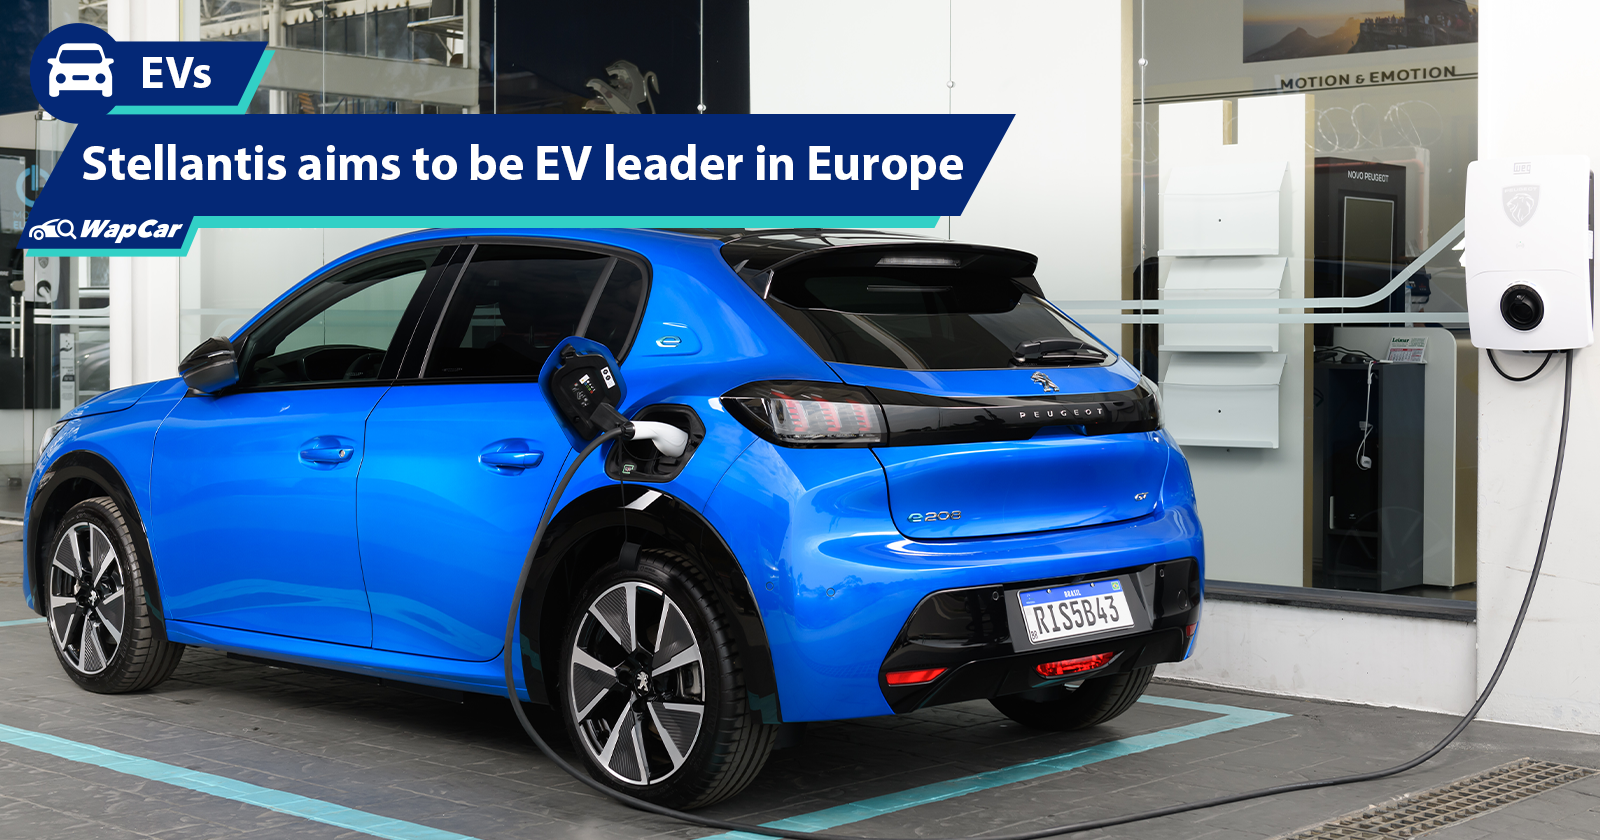 Stellantis overtakes Tesla, wants to be Europe's leader for EVs; Peugeot e-208 no. 1 EV in France